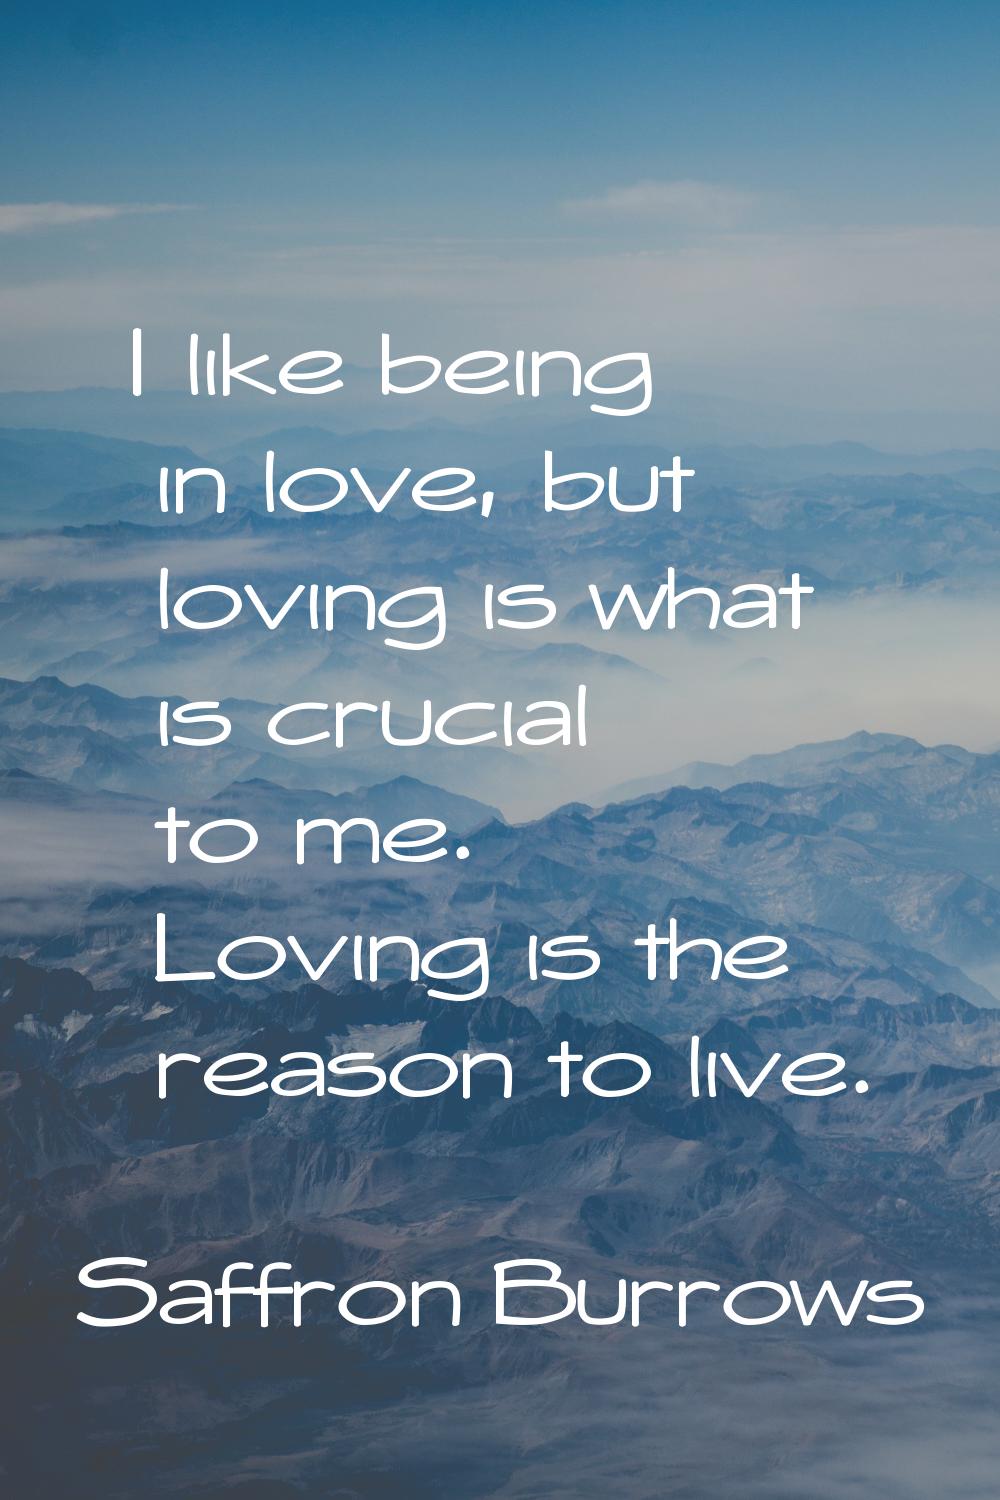 I like being in love, but loving is what is crucial to me. Loving is the reason to live.